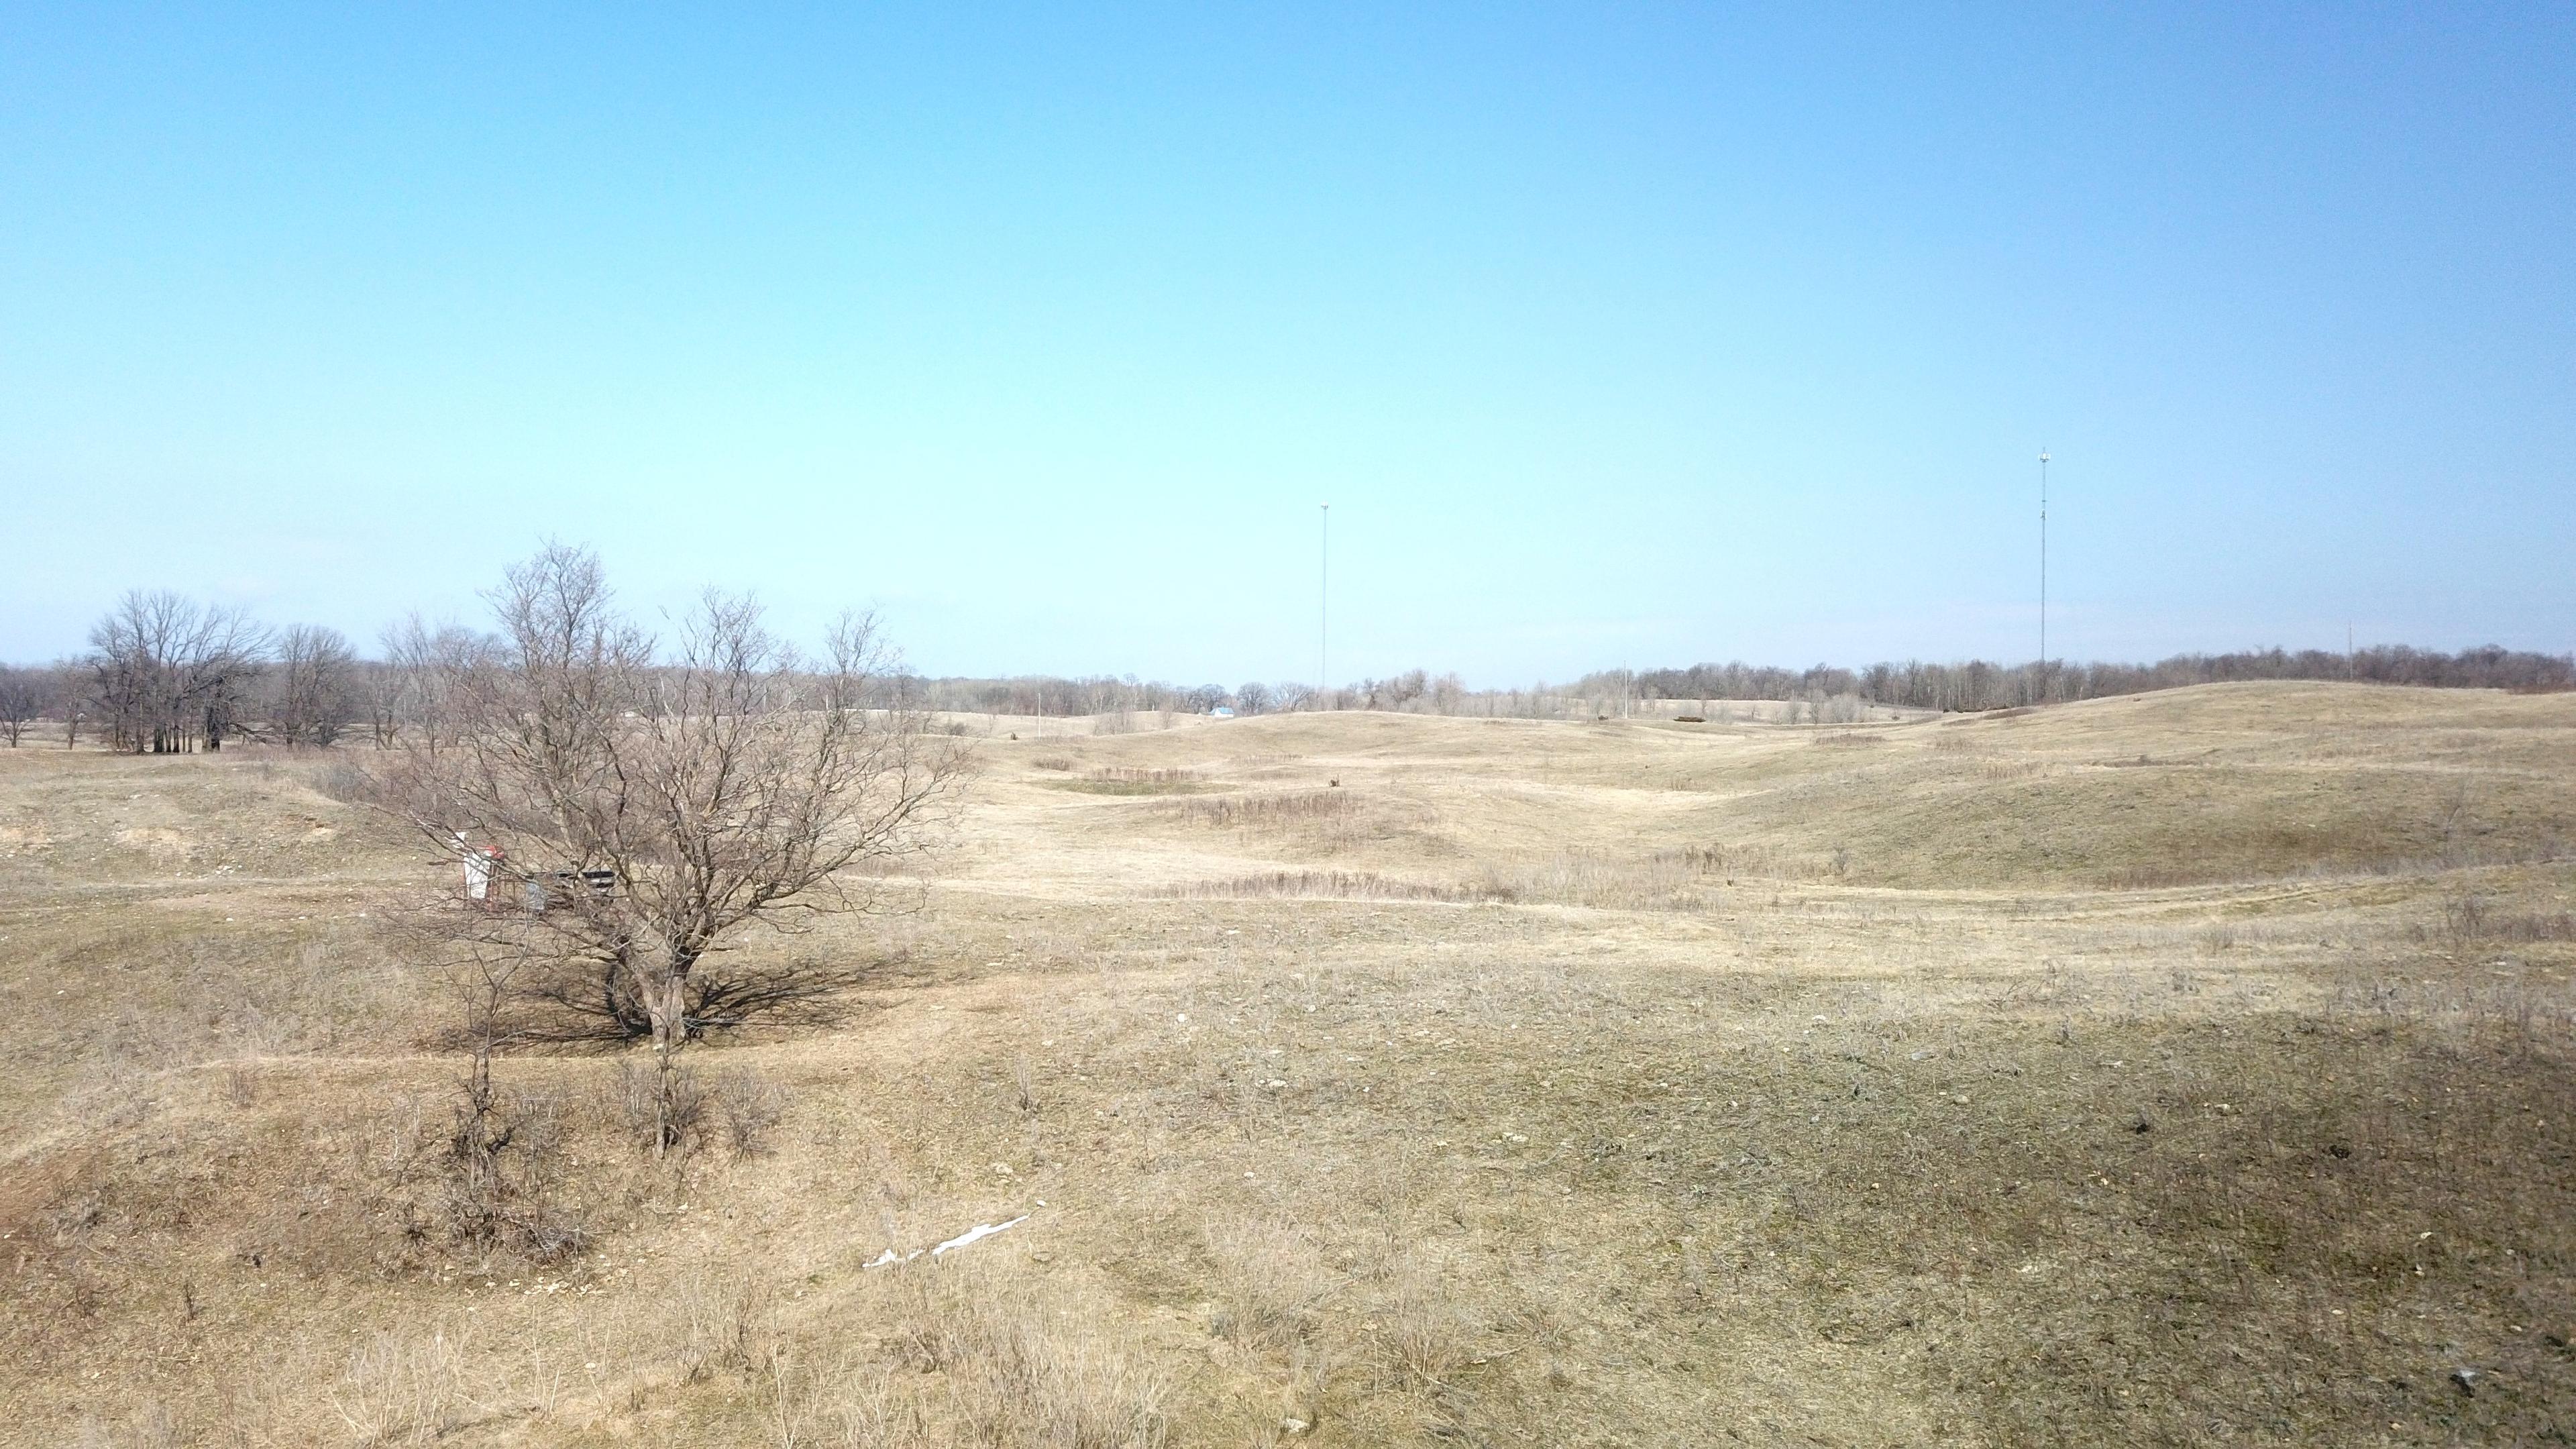 34+/- Acres of land in Basswood